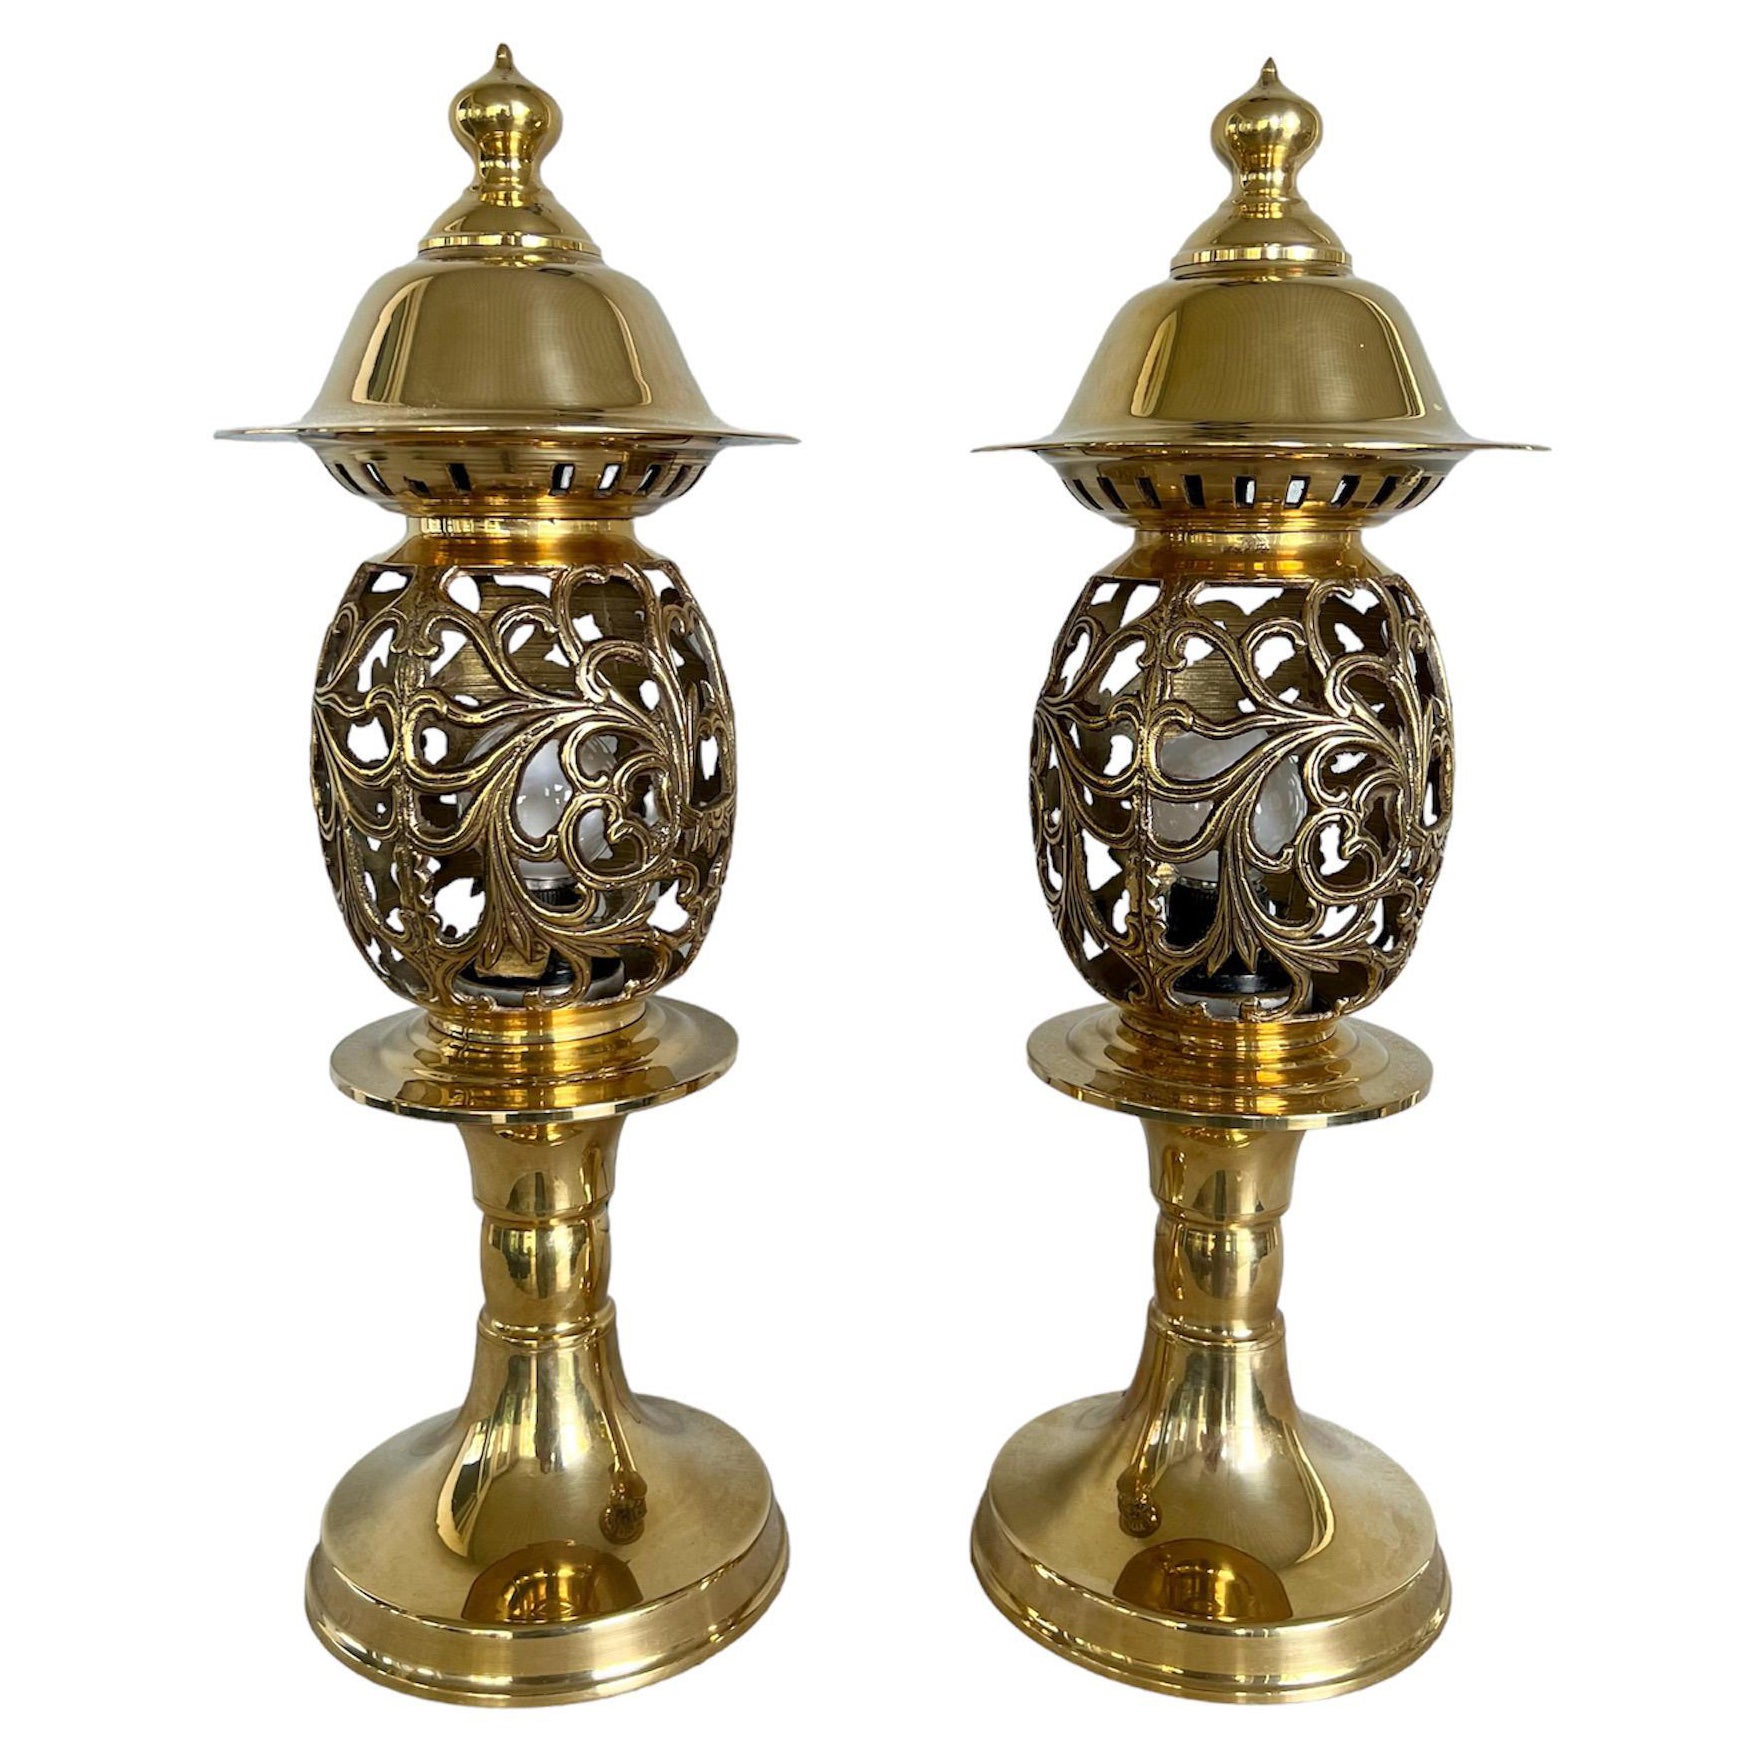 Vintage Solid Brass Scroll Table Lamps-A Pair For Sale